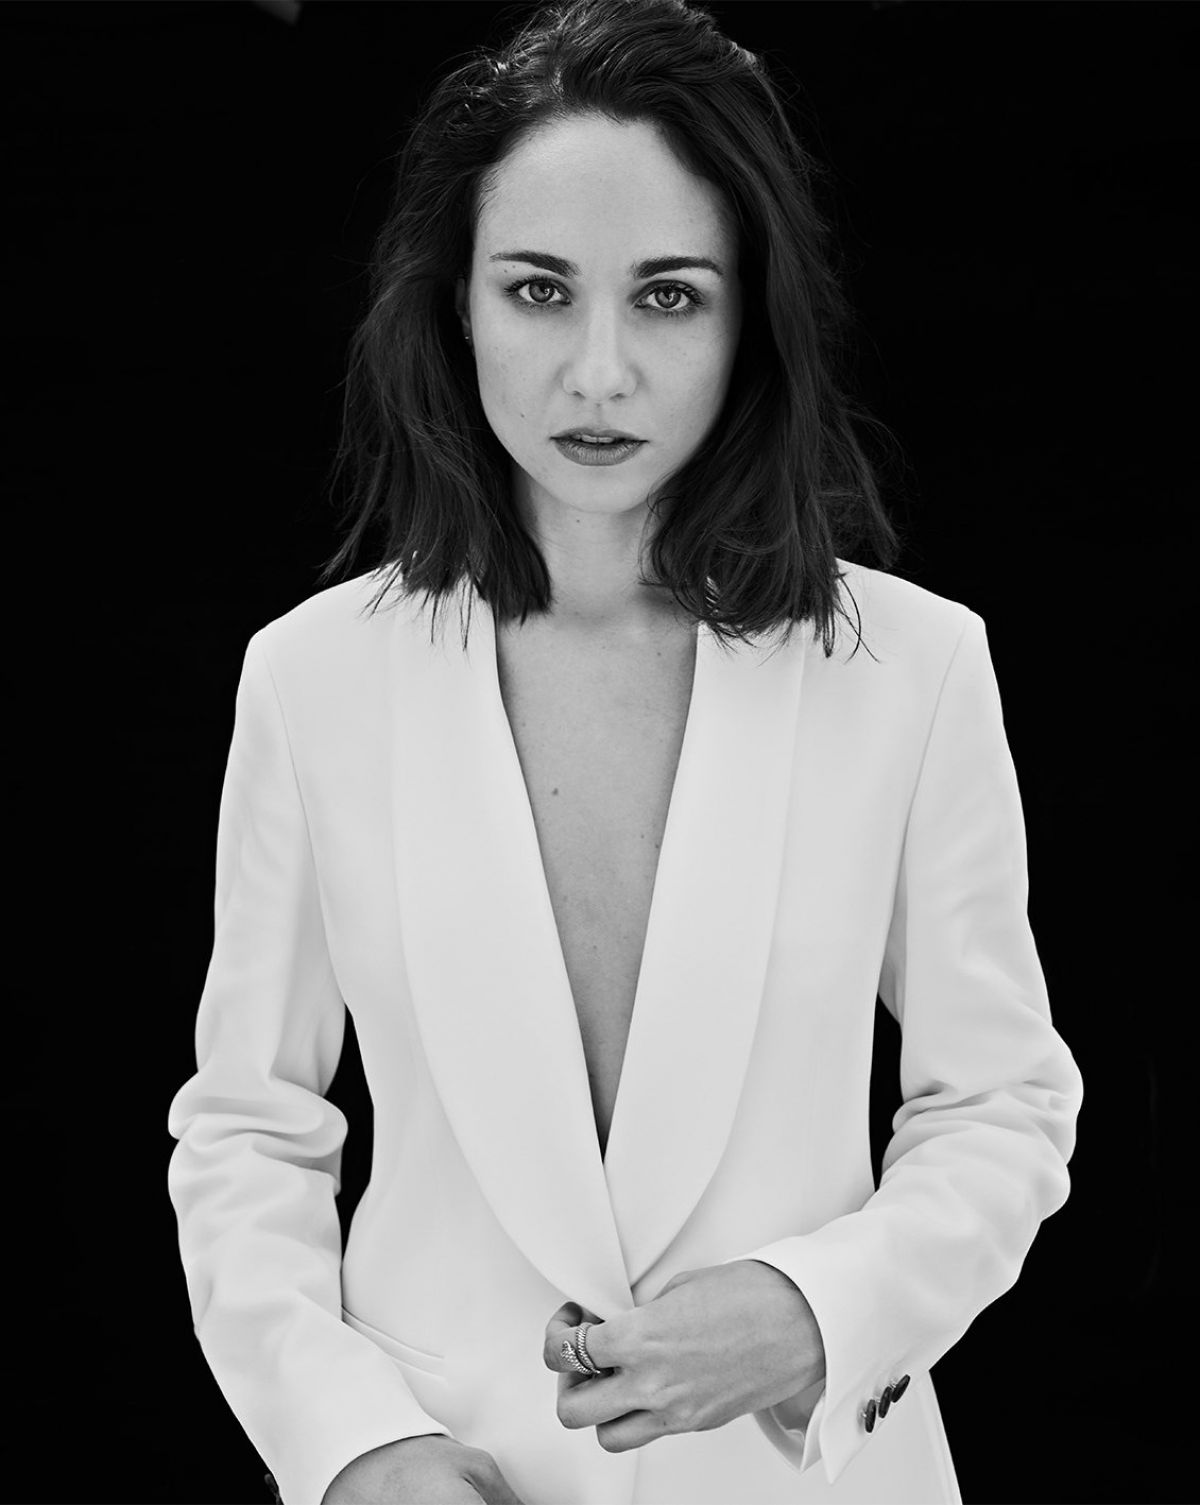 Tuppence Middleton 2019 Wallpapers